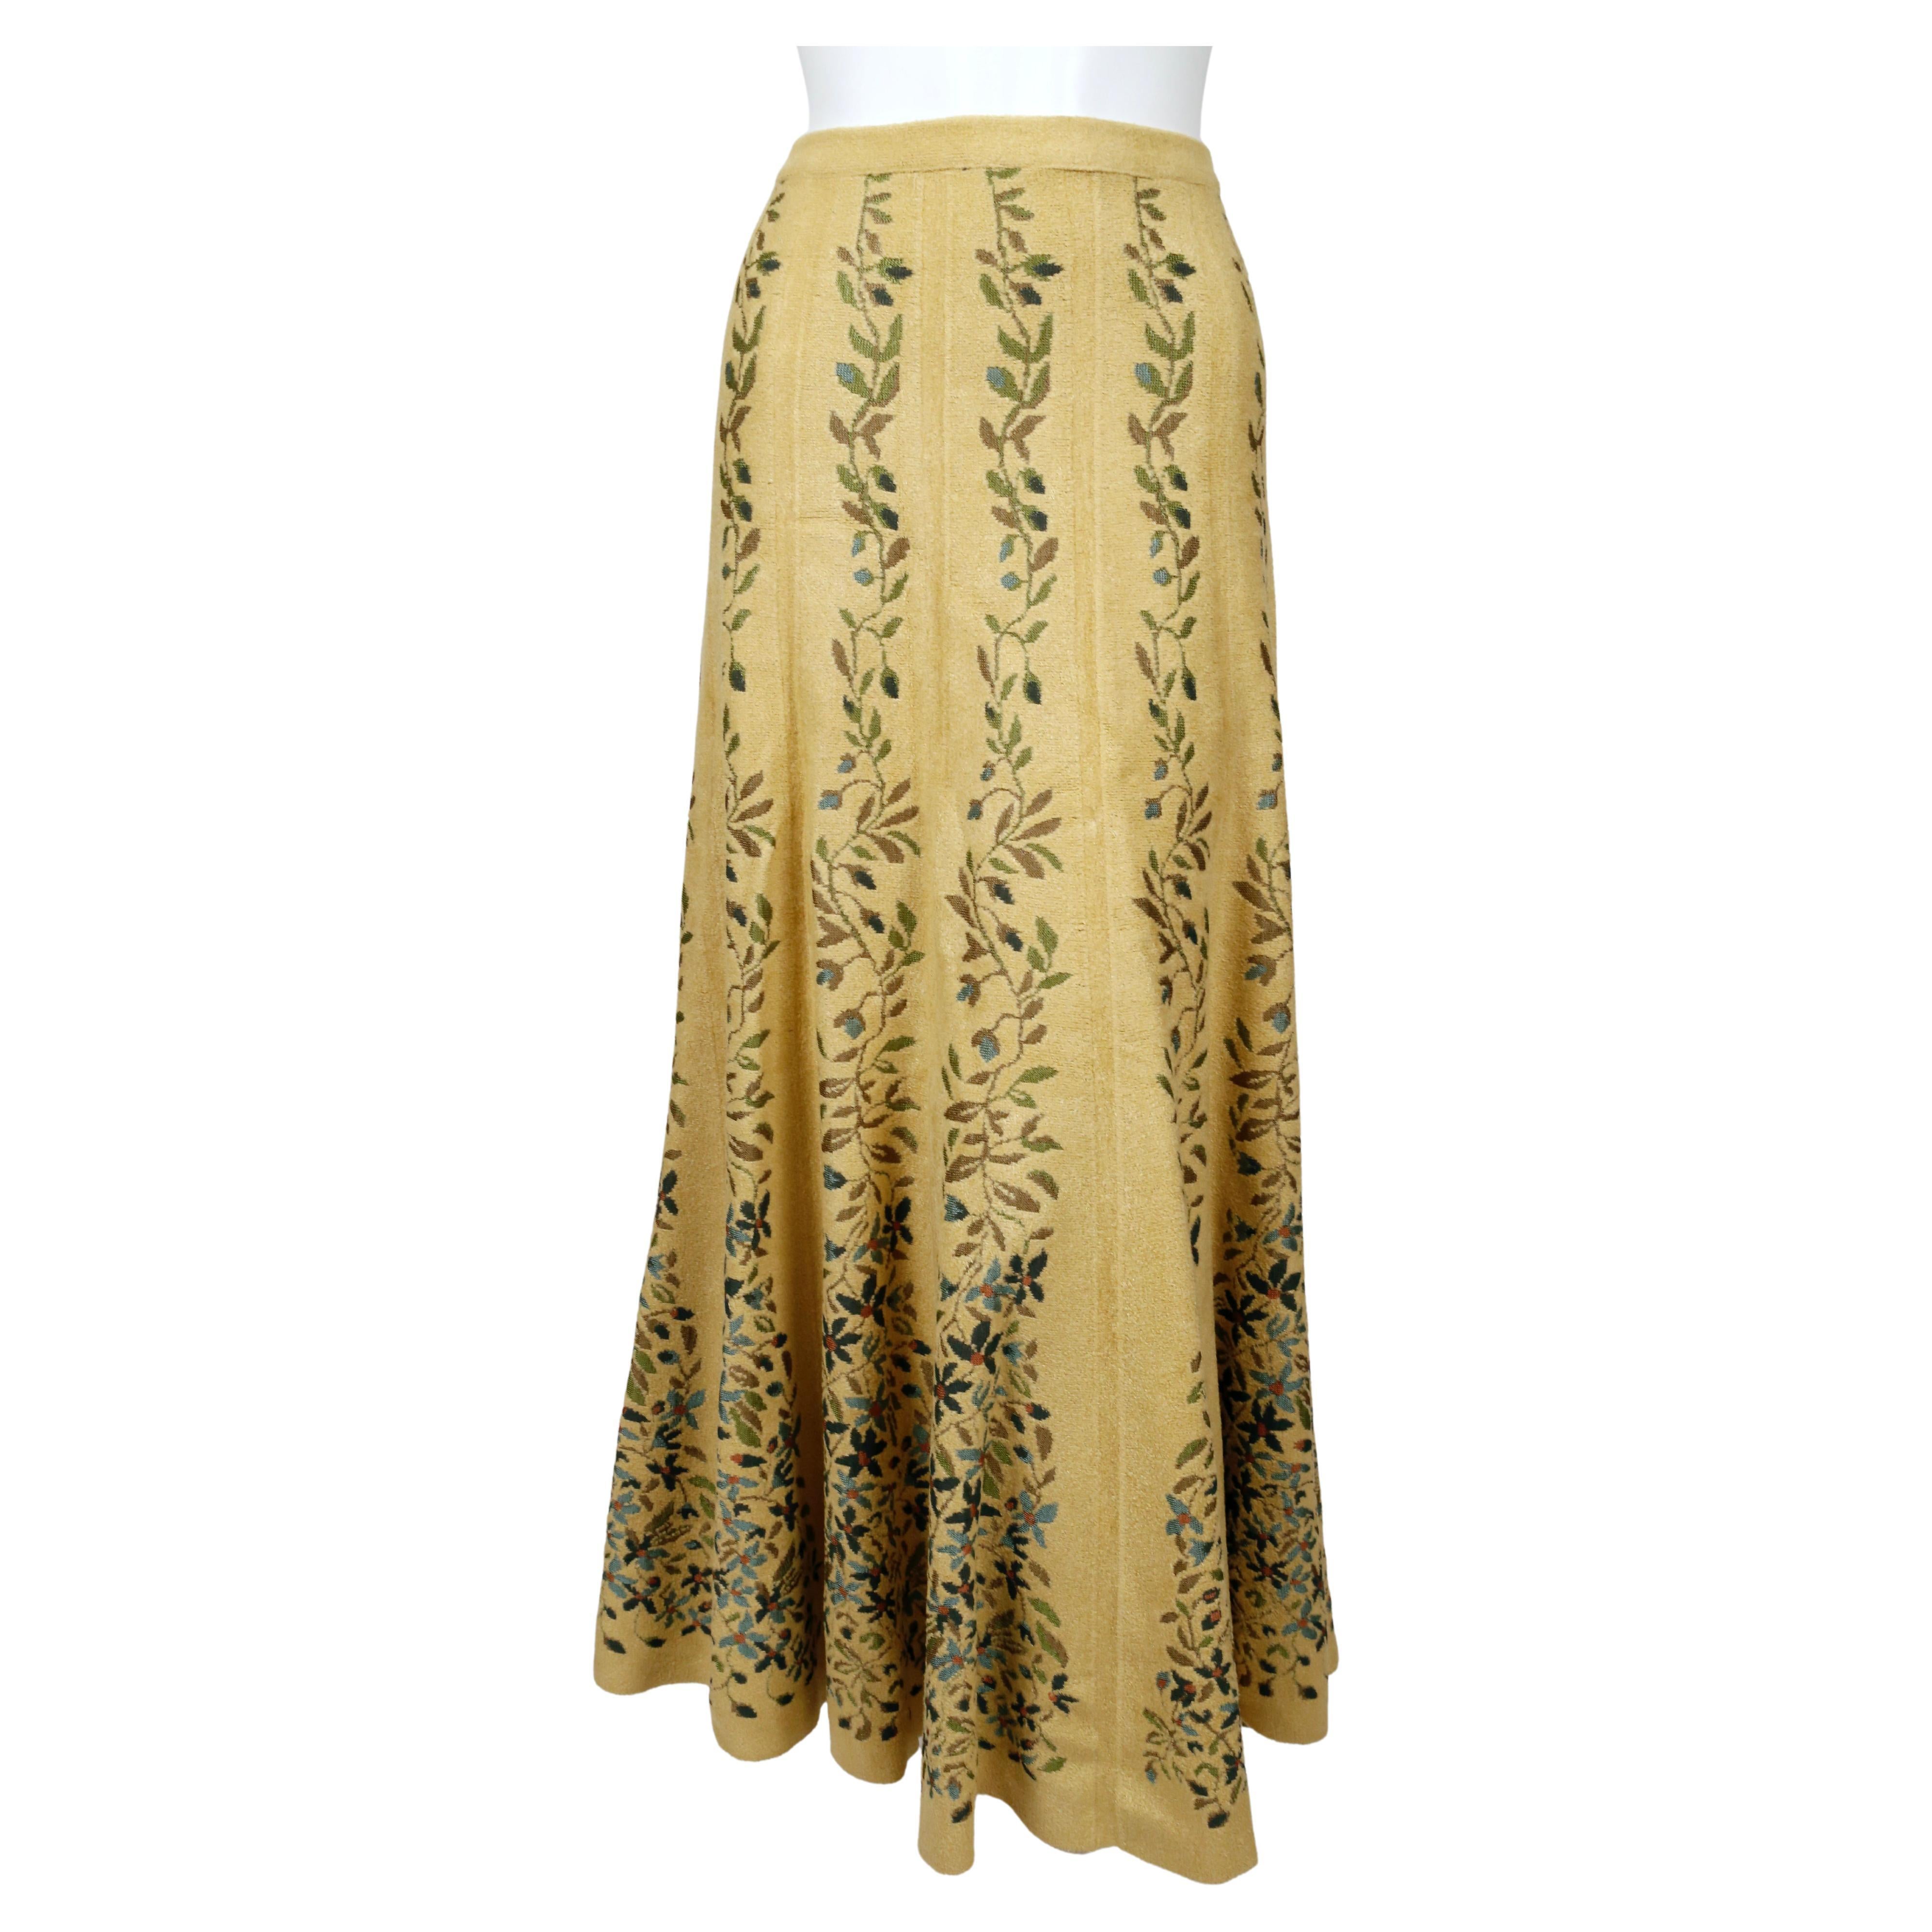 Very rare, pale-yellow floor length knit skirt with floral intarsia knit detail from Azzedine Alaia dating to the fall of 1999 as seen on Karolína Kurková from the pages of Elle magazine. Labeled a size M however this best fits a S or M. Approximate